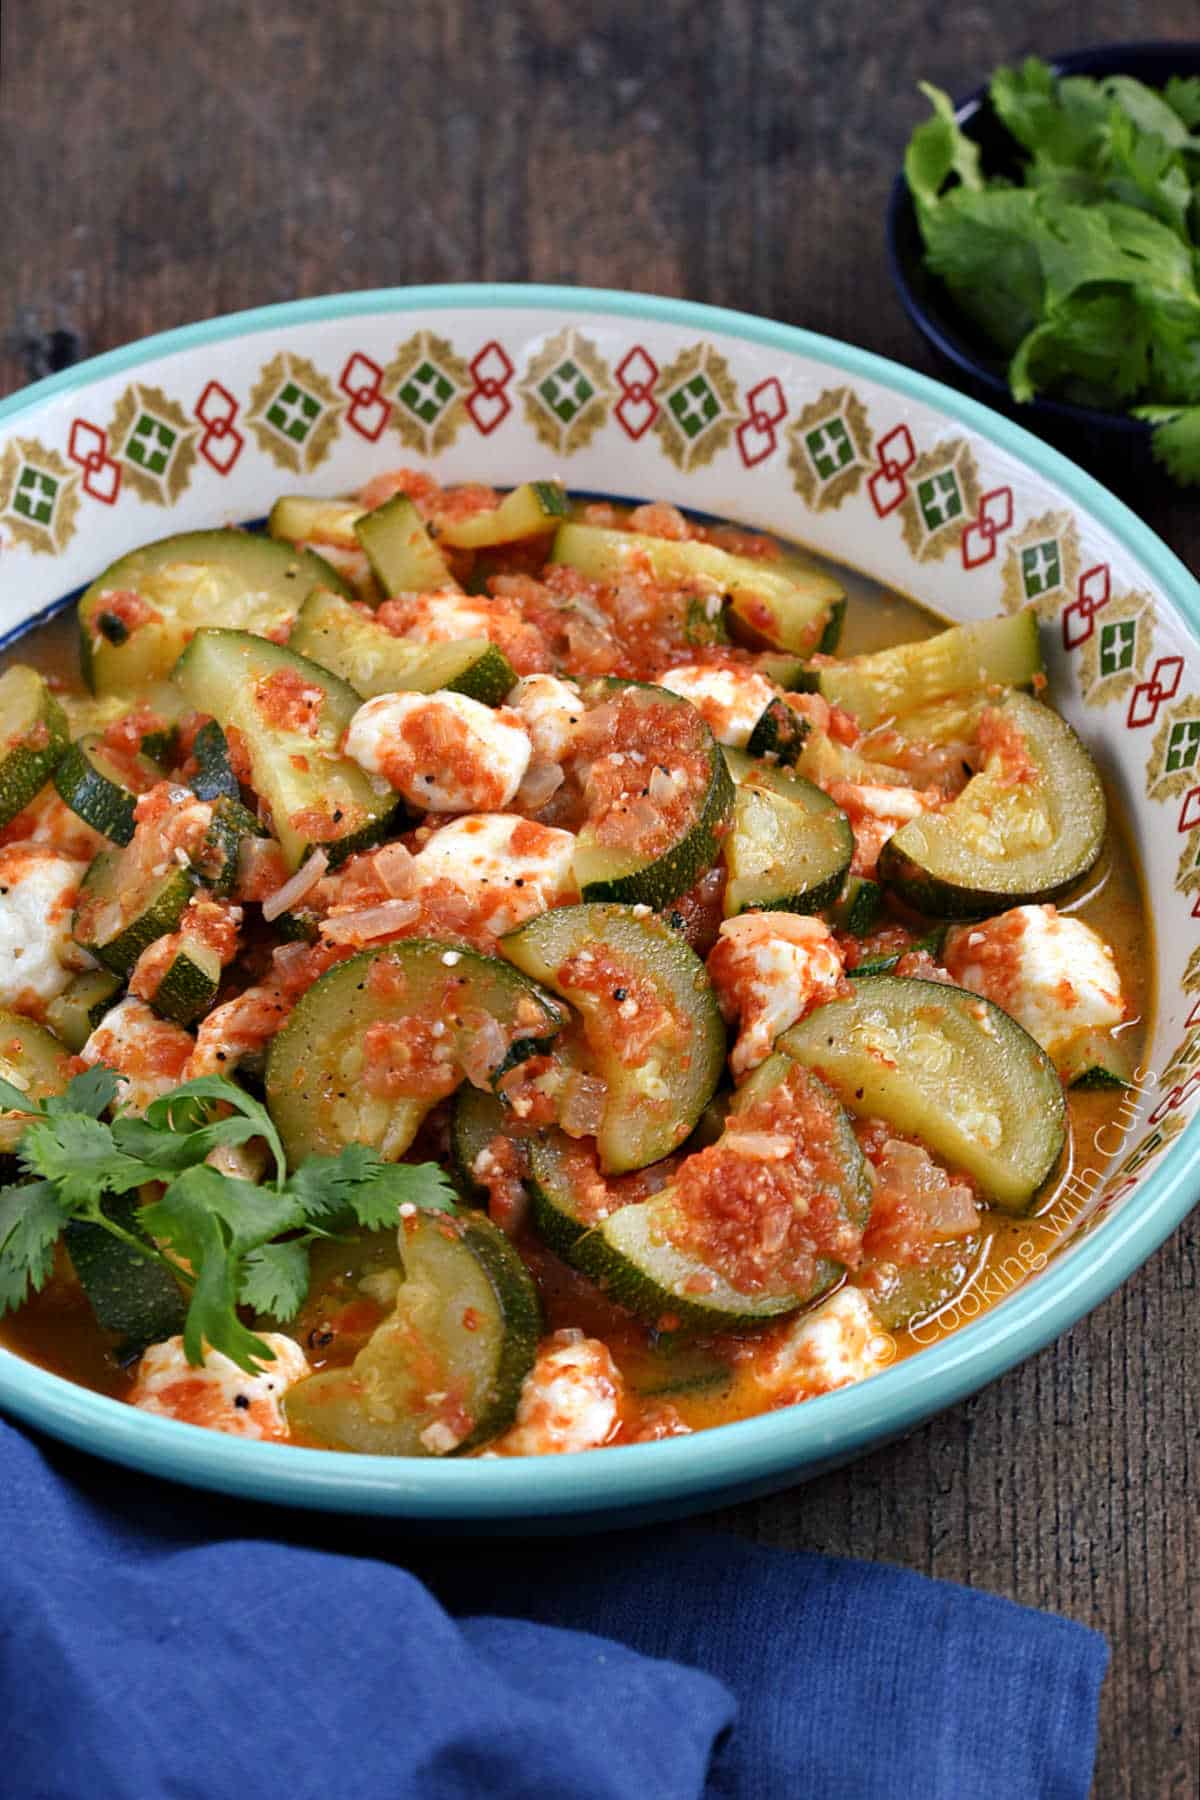 A bowl of half rounds of zucchini and chunks of cheese in a tomato sauce.